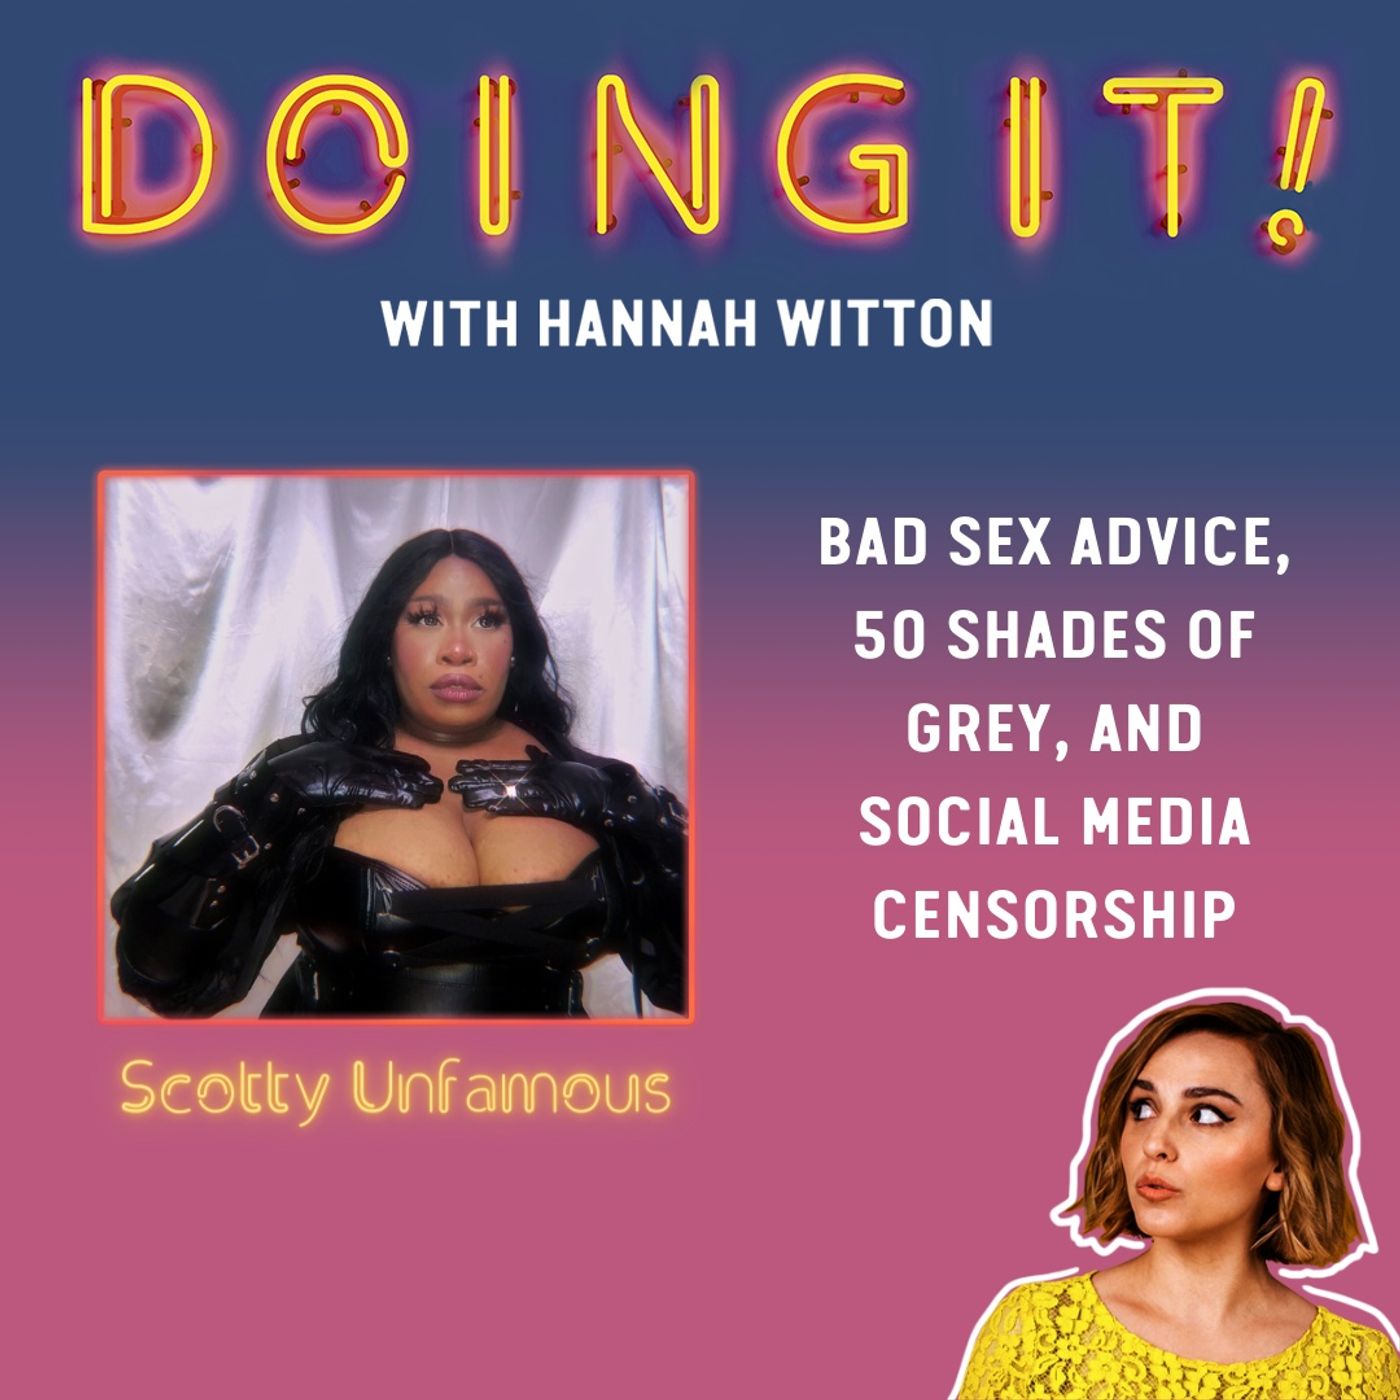 Bad Sex Advice, 50 Shades of Grey and Social Media Censorship with Scotty Unfamous